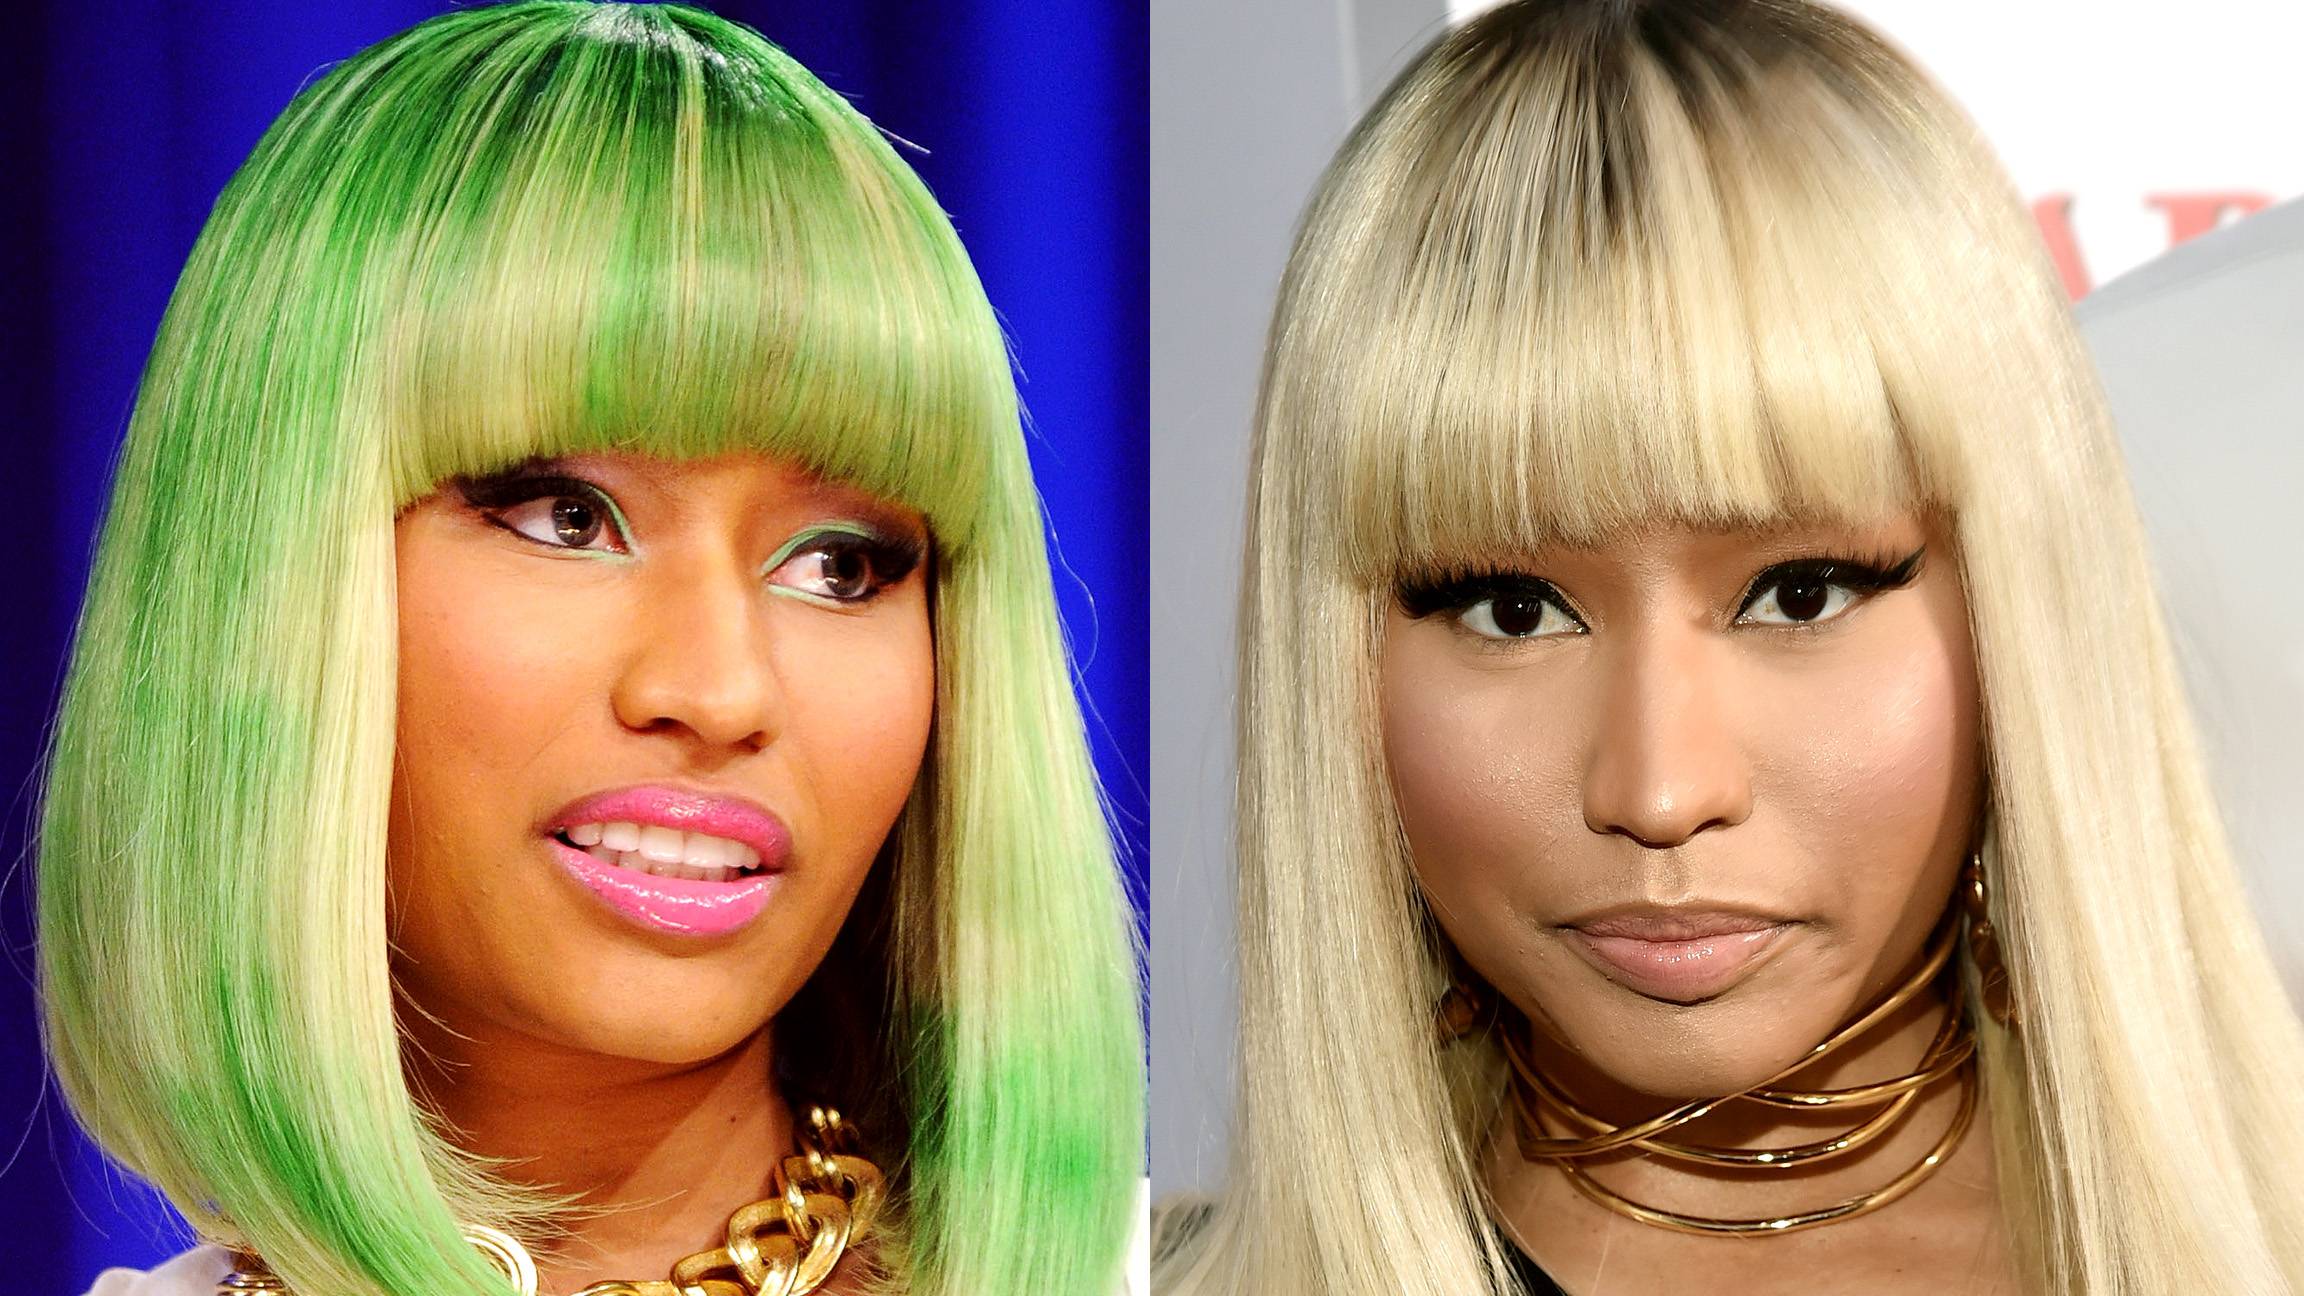 Nicki Minaj The Image 6 From 10 Celebs Who Have Been Accused Of Lightening Their Skin Bet 